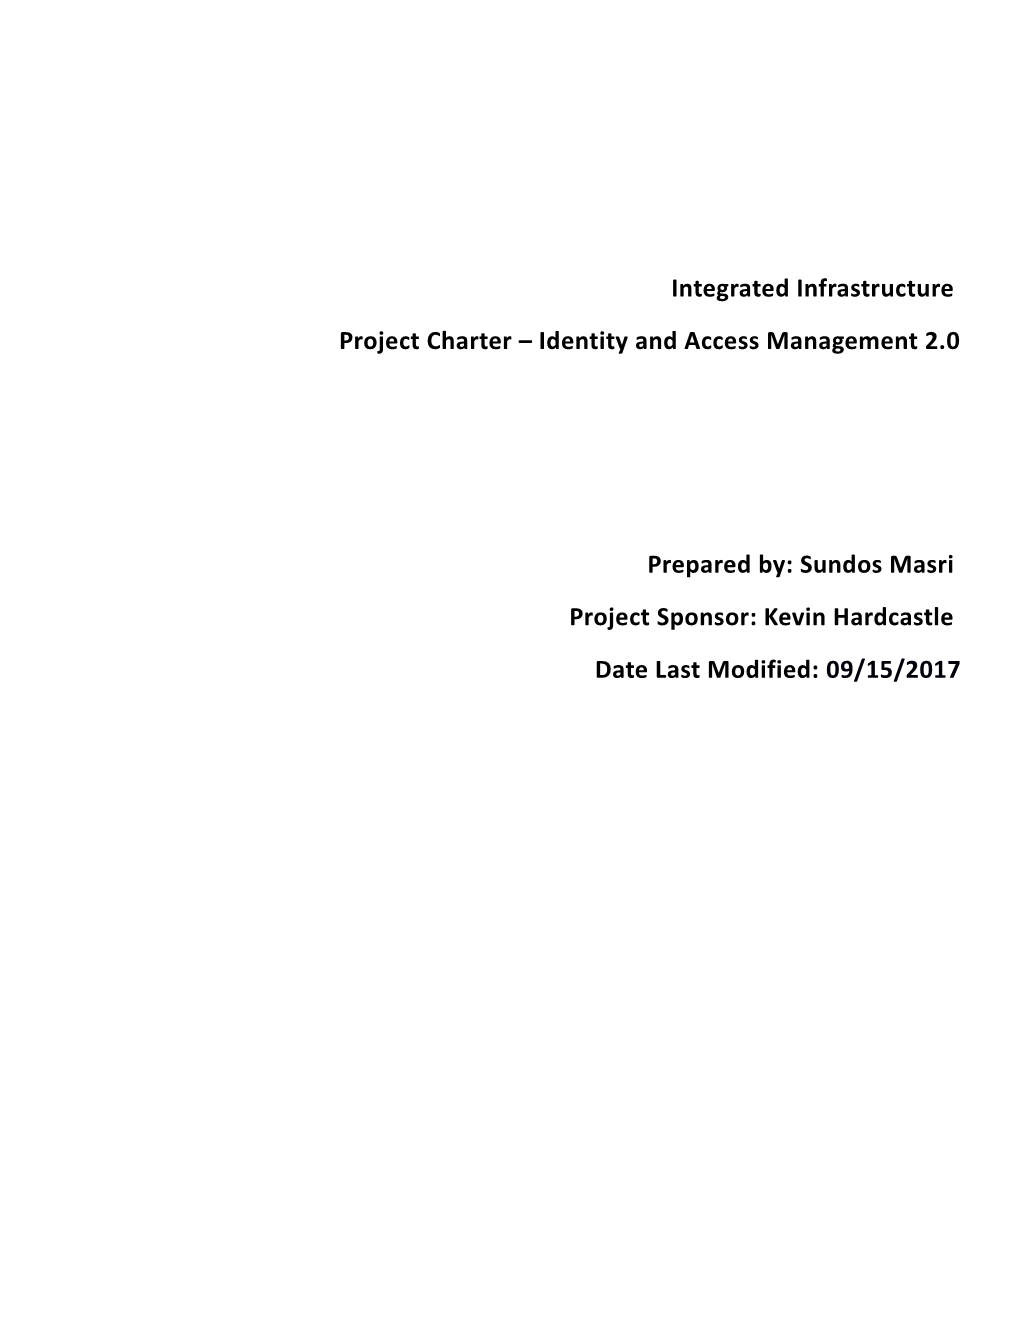 AD/IAM Project Charter